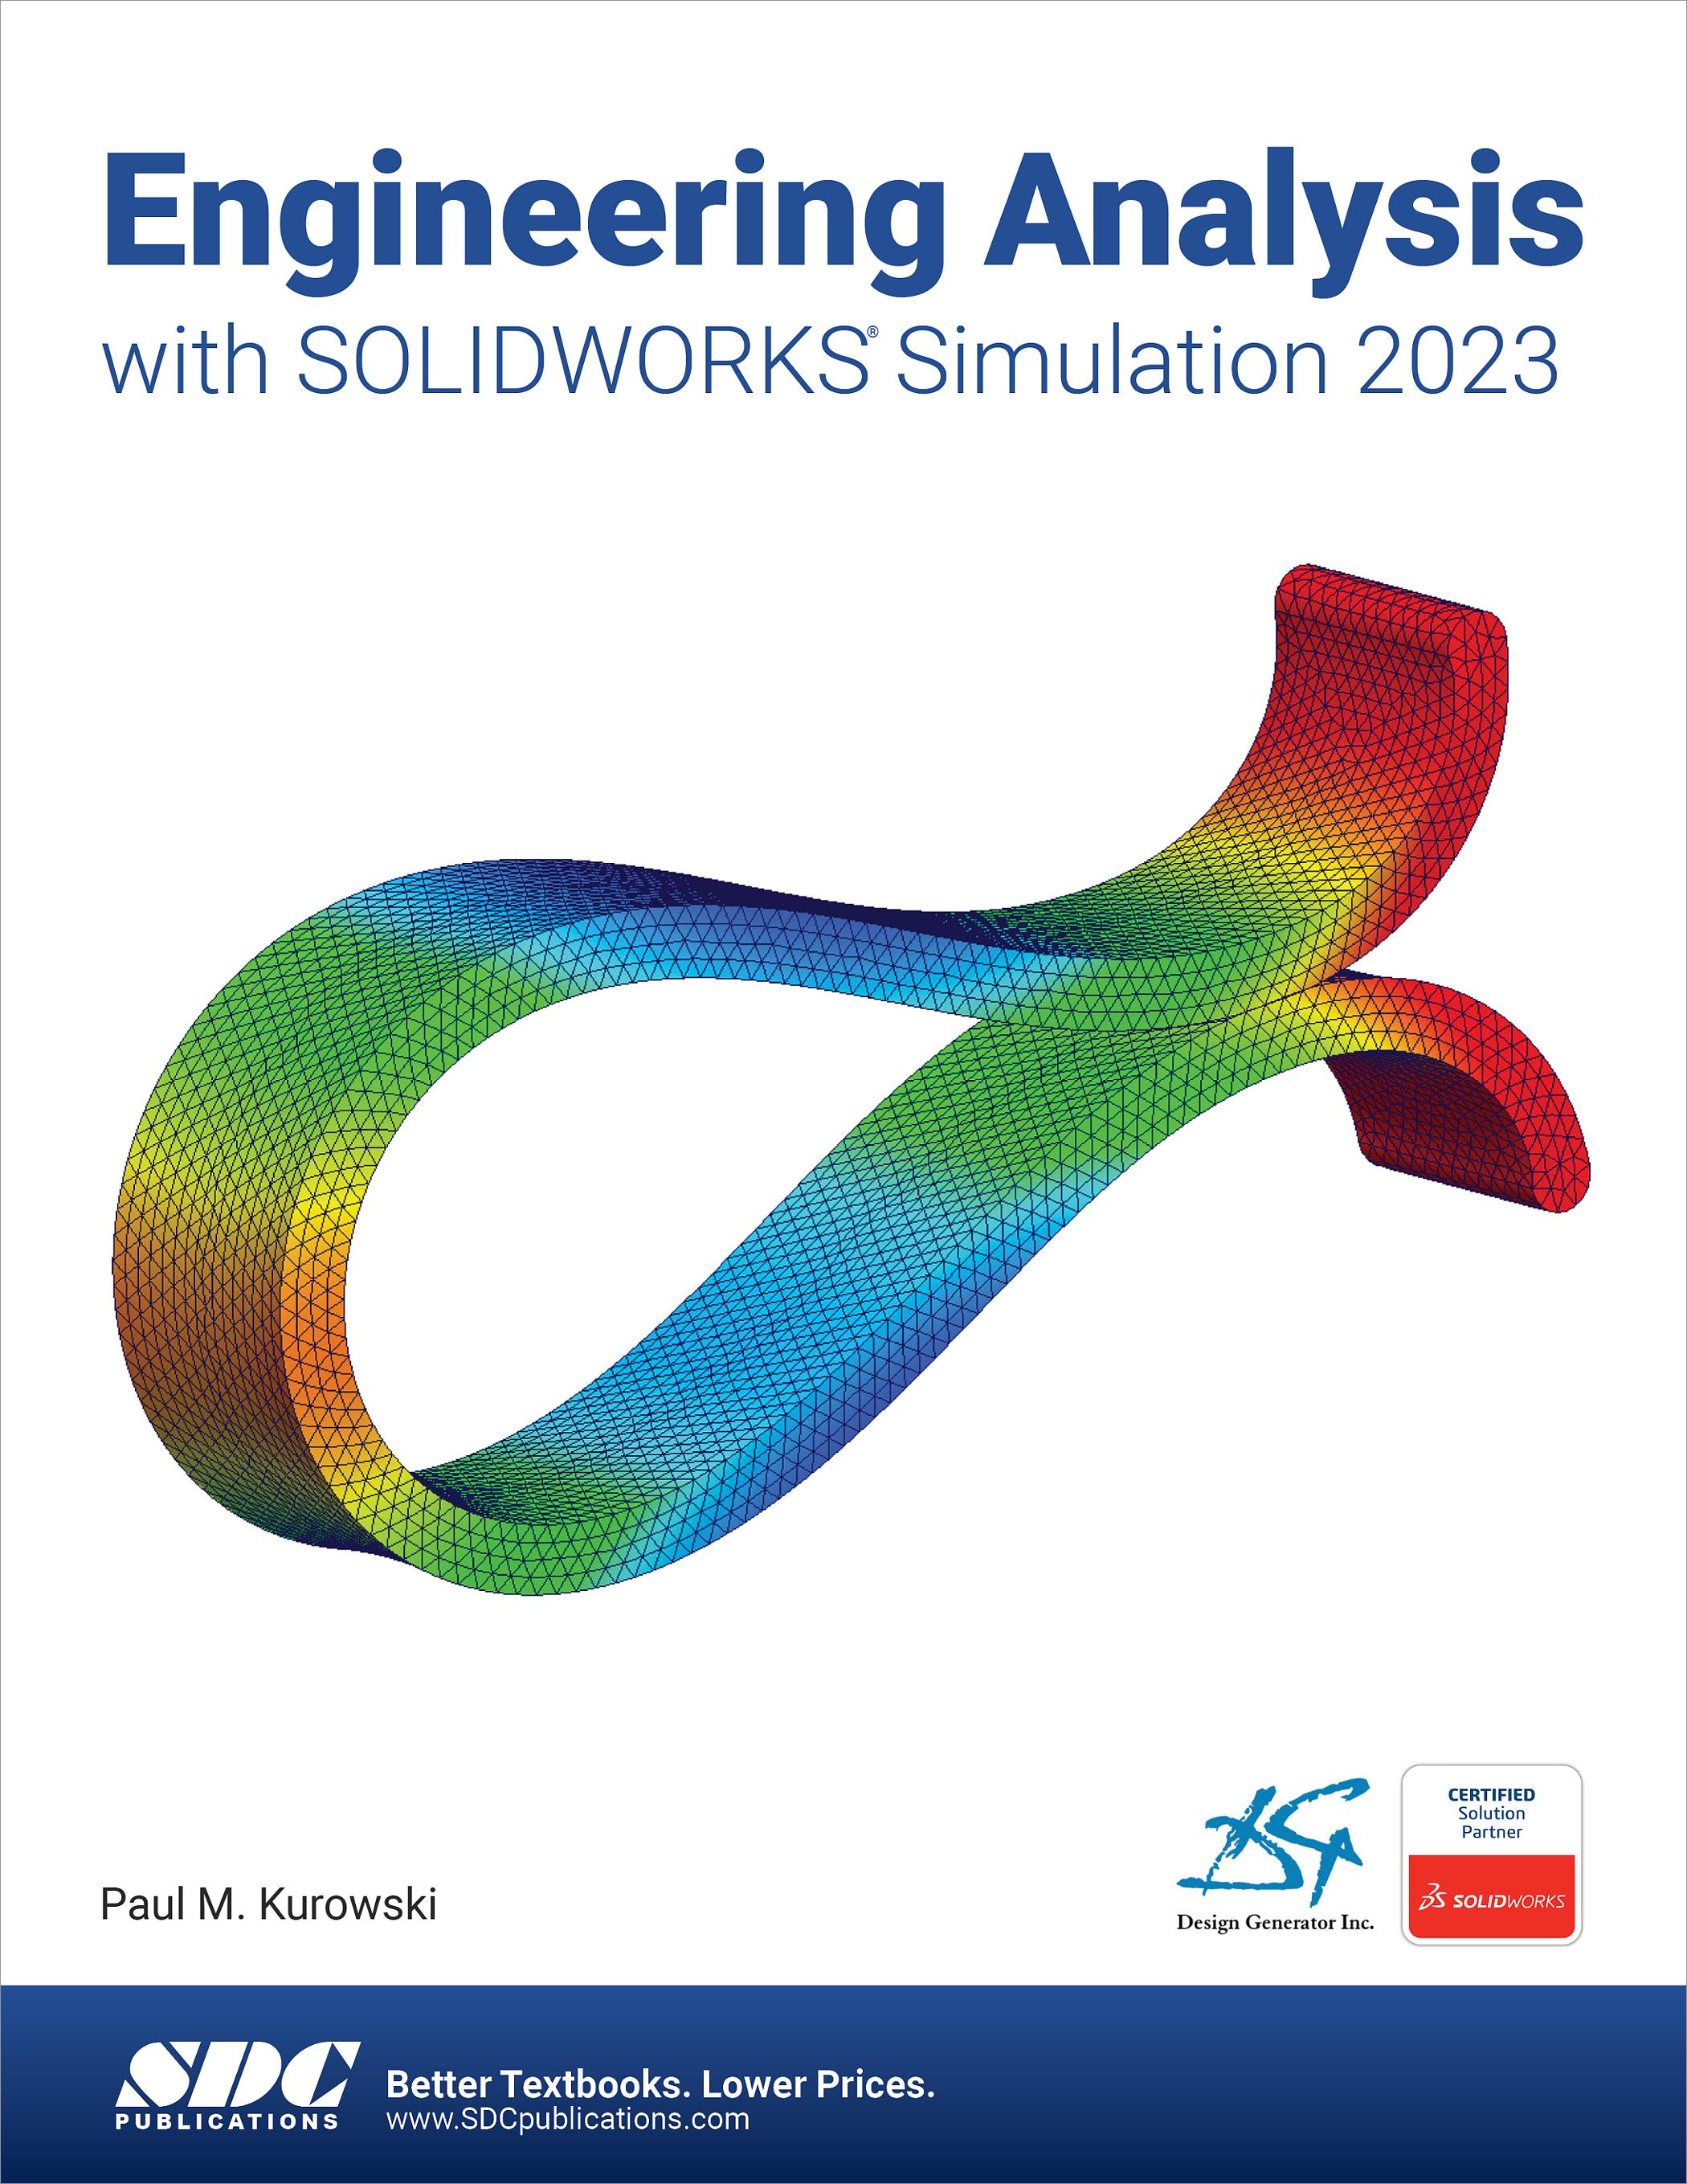 engineering-analysis-with-solidworks-simulation-2023-book-9781630575526-sdc-publications